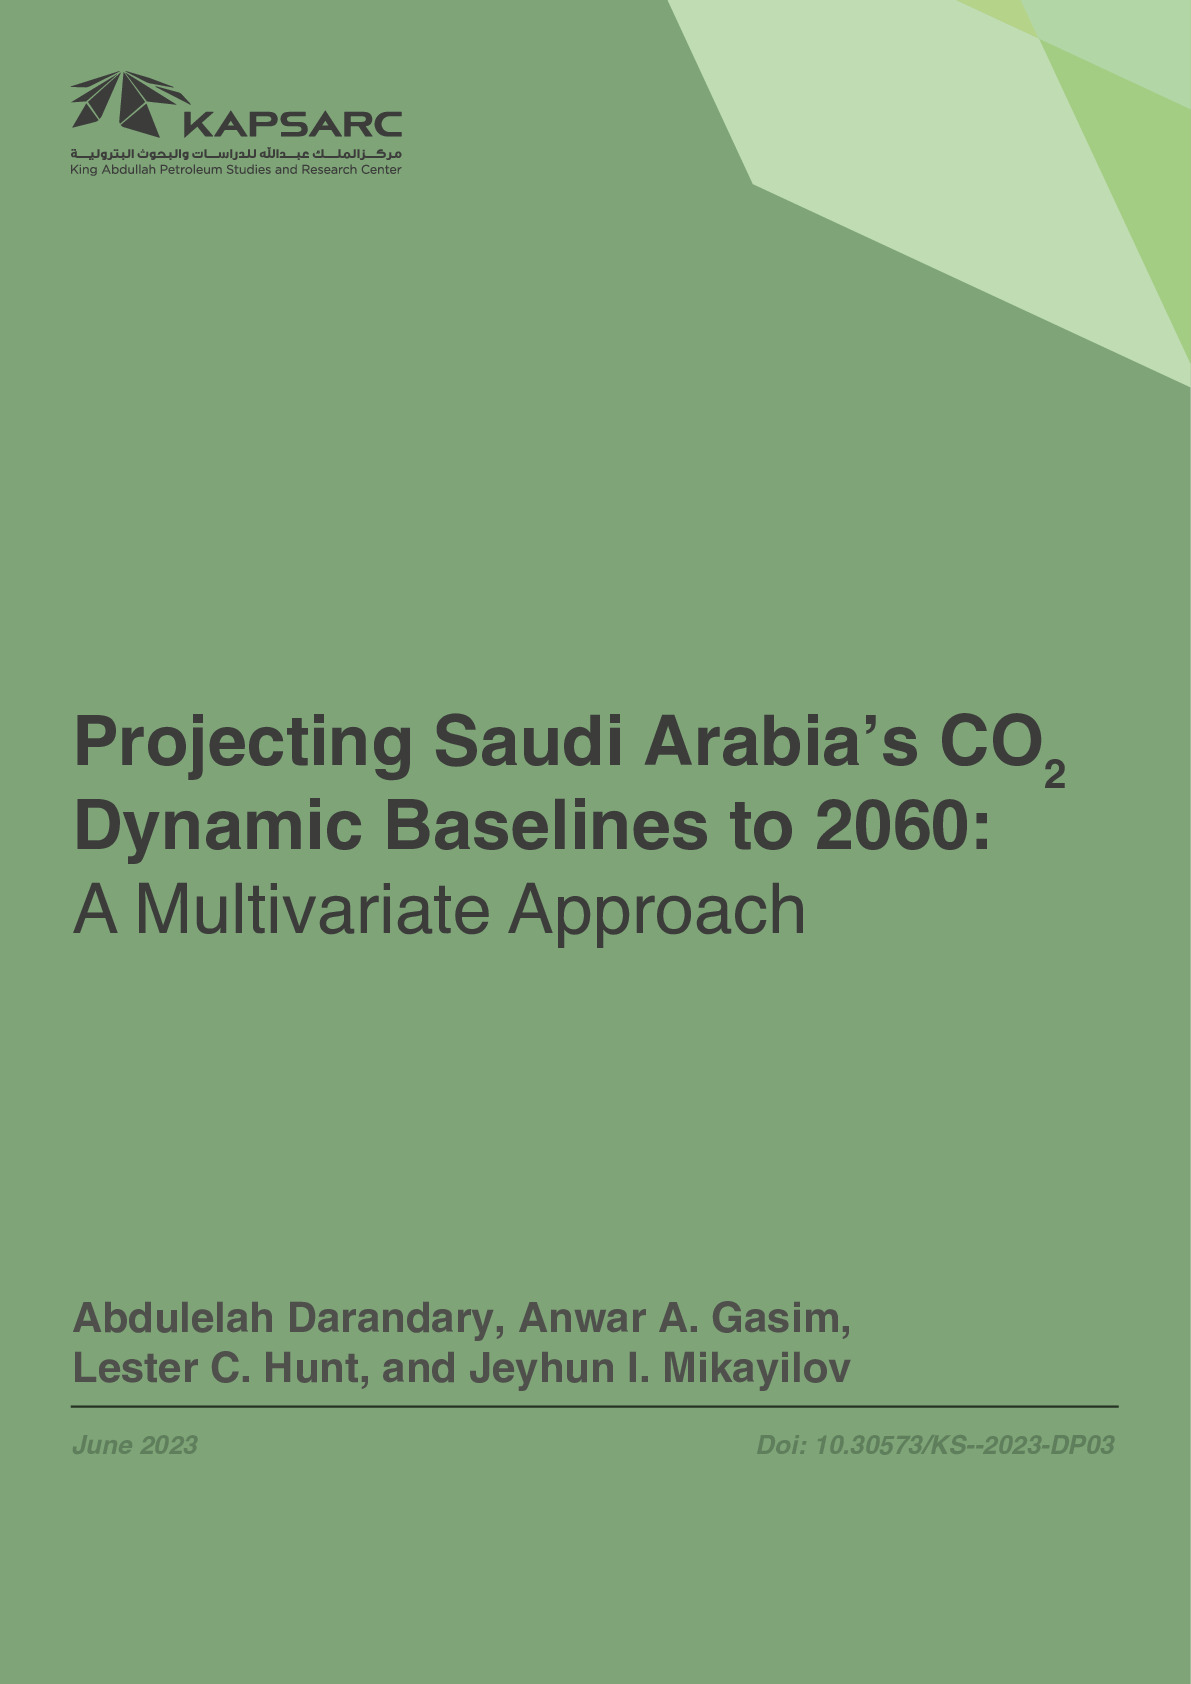 Projecting Saudi Arabia’s CO2 Dynamic Baselines to 2060: A Multivariate Approach